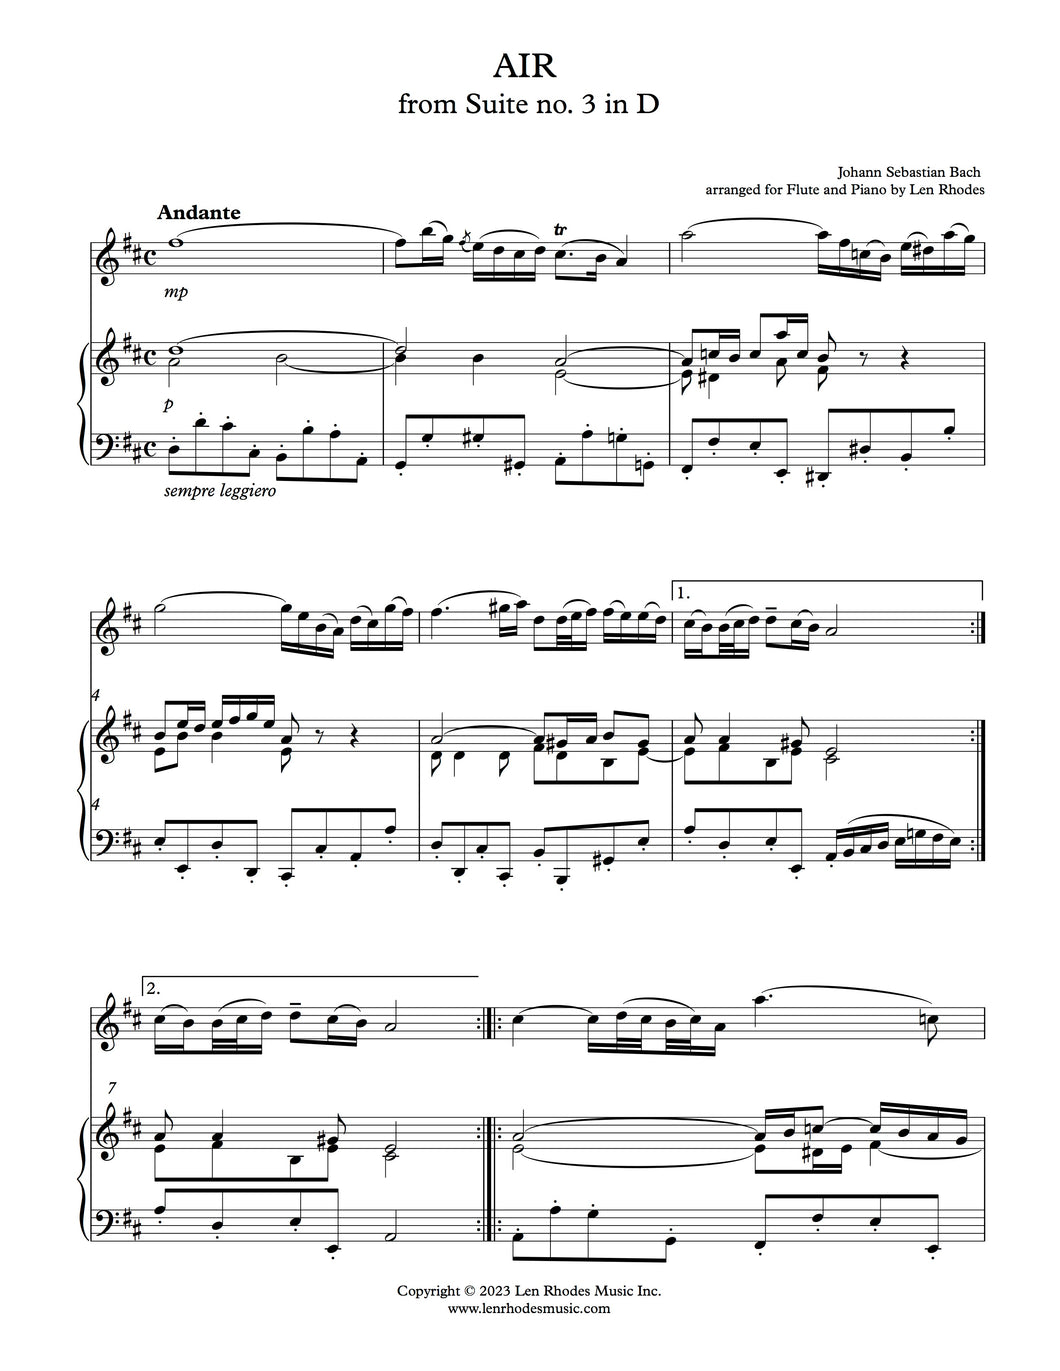 ‘Air’ from Suite no. 3 in D, Bach - Flute and Piano